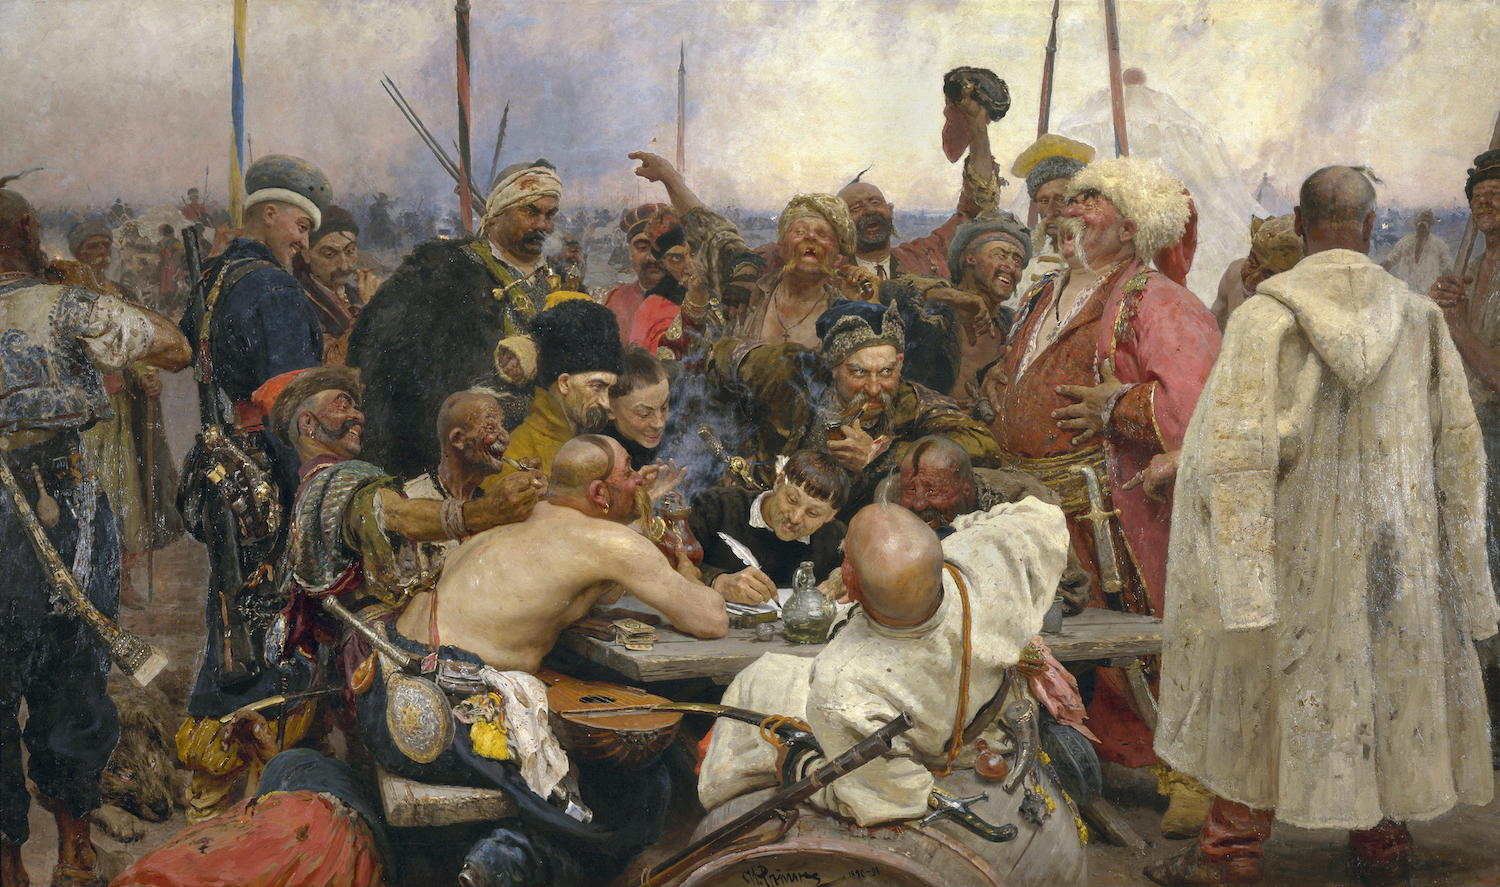 Reply of the Zaporozhian Cossacks to Sultan Mehmed IV of the Ottoman Empire by Ilya Repin, 1891. Wikipedia.
